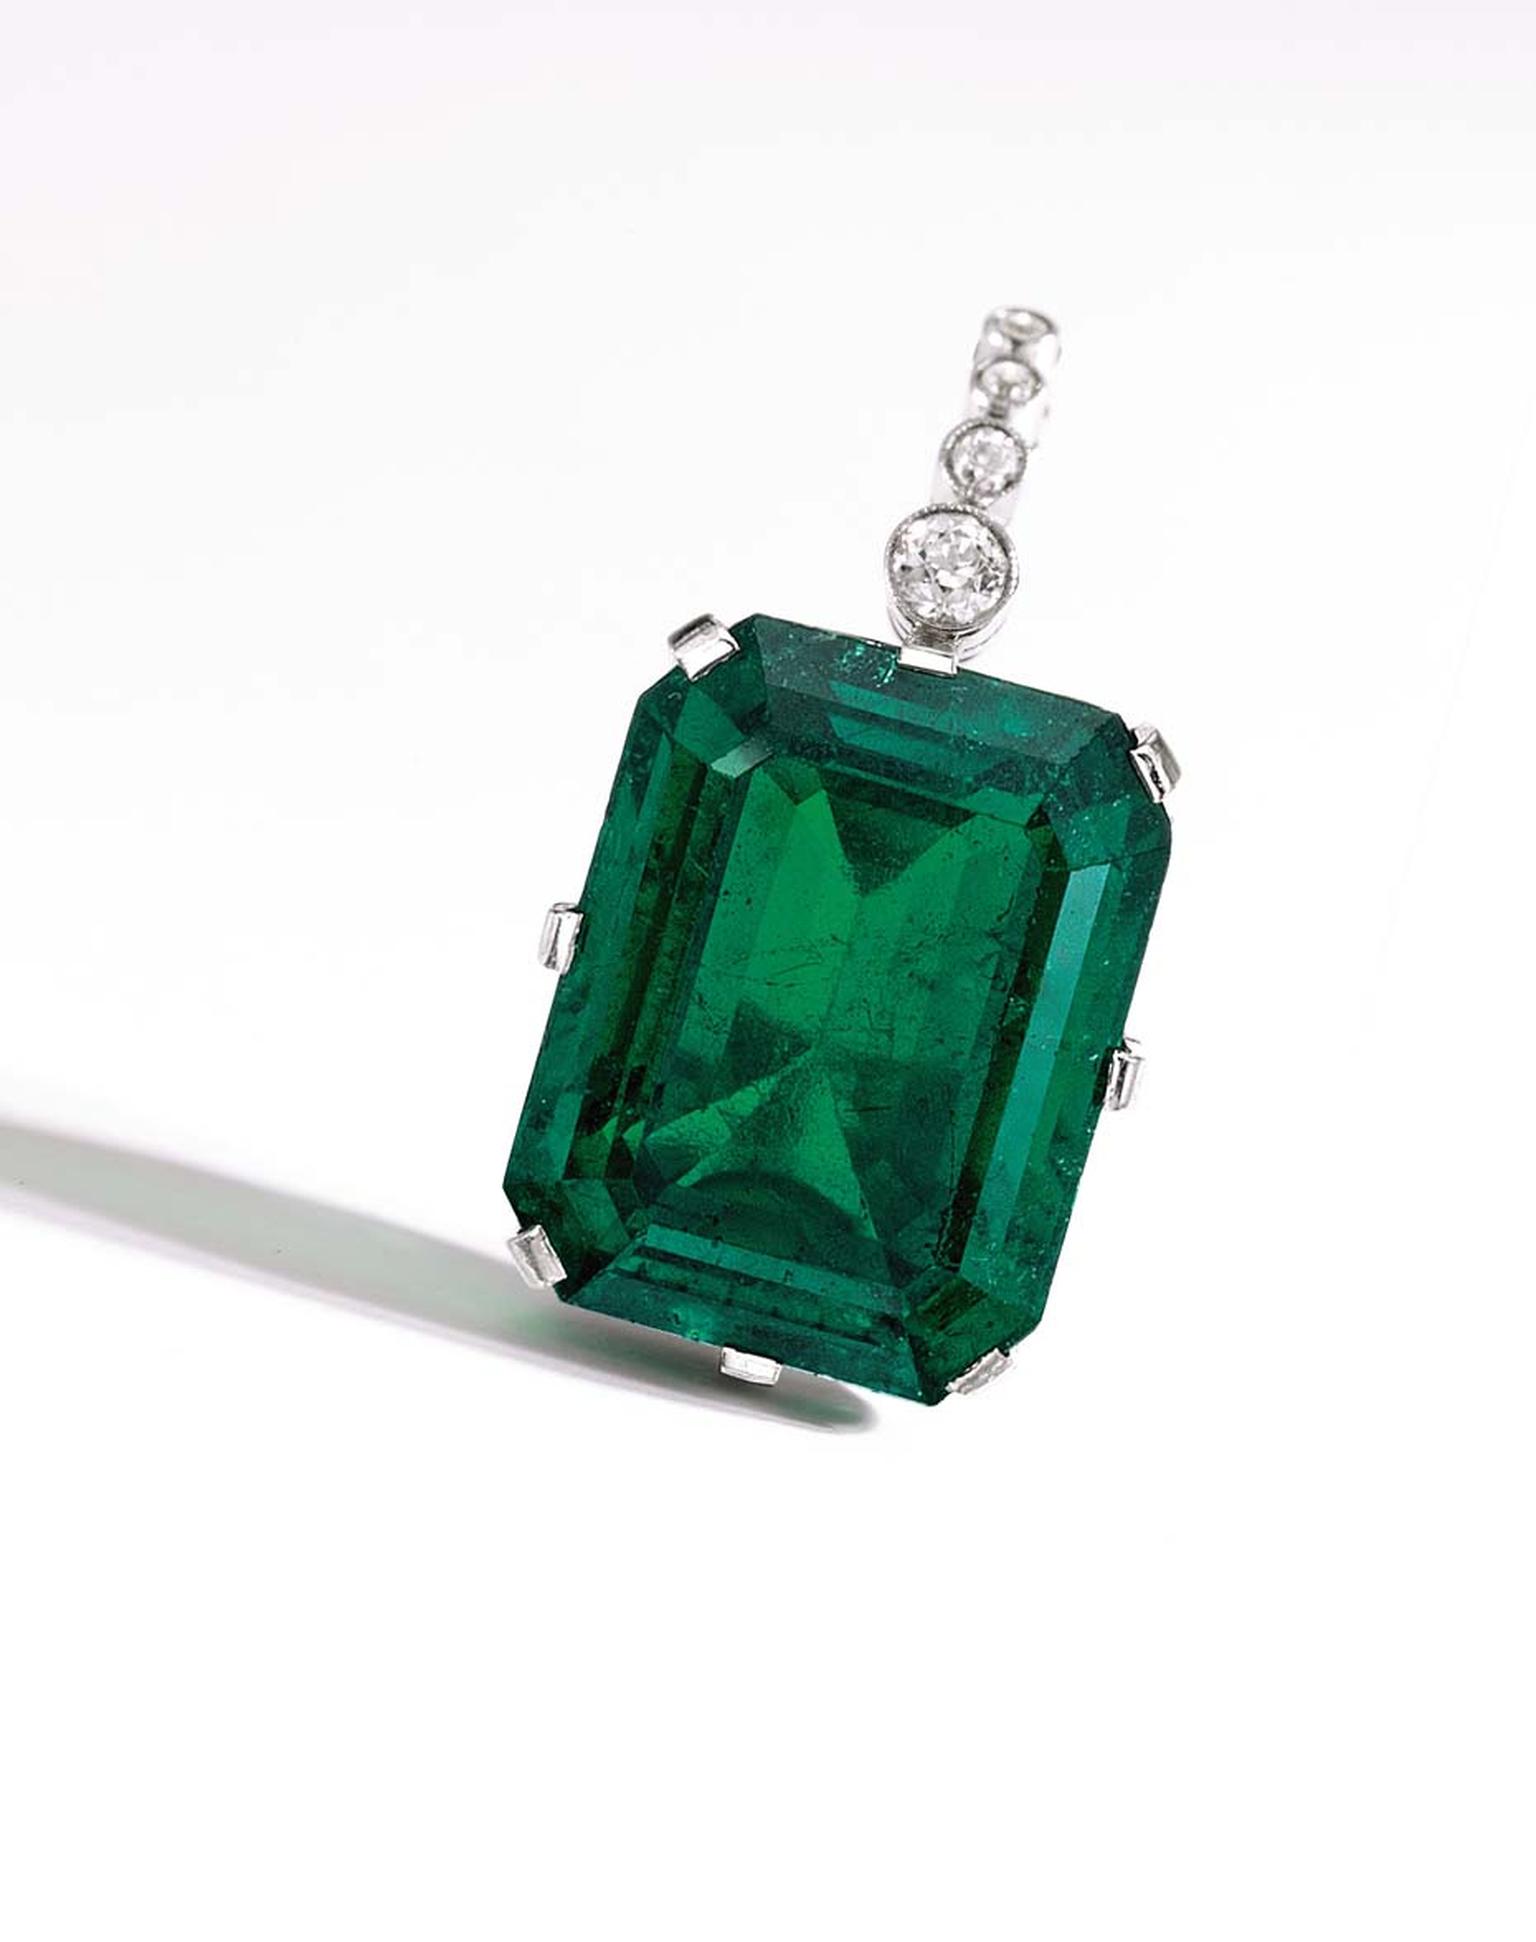 An important platinum, diamond and Colombian emerald pendant. The 35.02ct emerald belonged to the wife of Henry Flagler, American industrialist and pioneering developer of Florida's eastern coastline, and sold for $2.8 million.